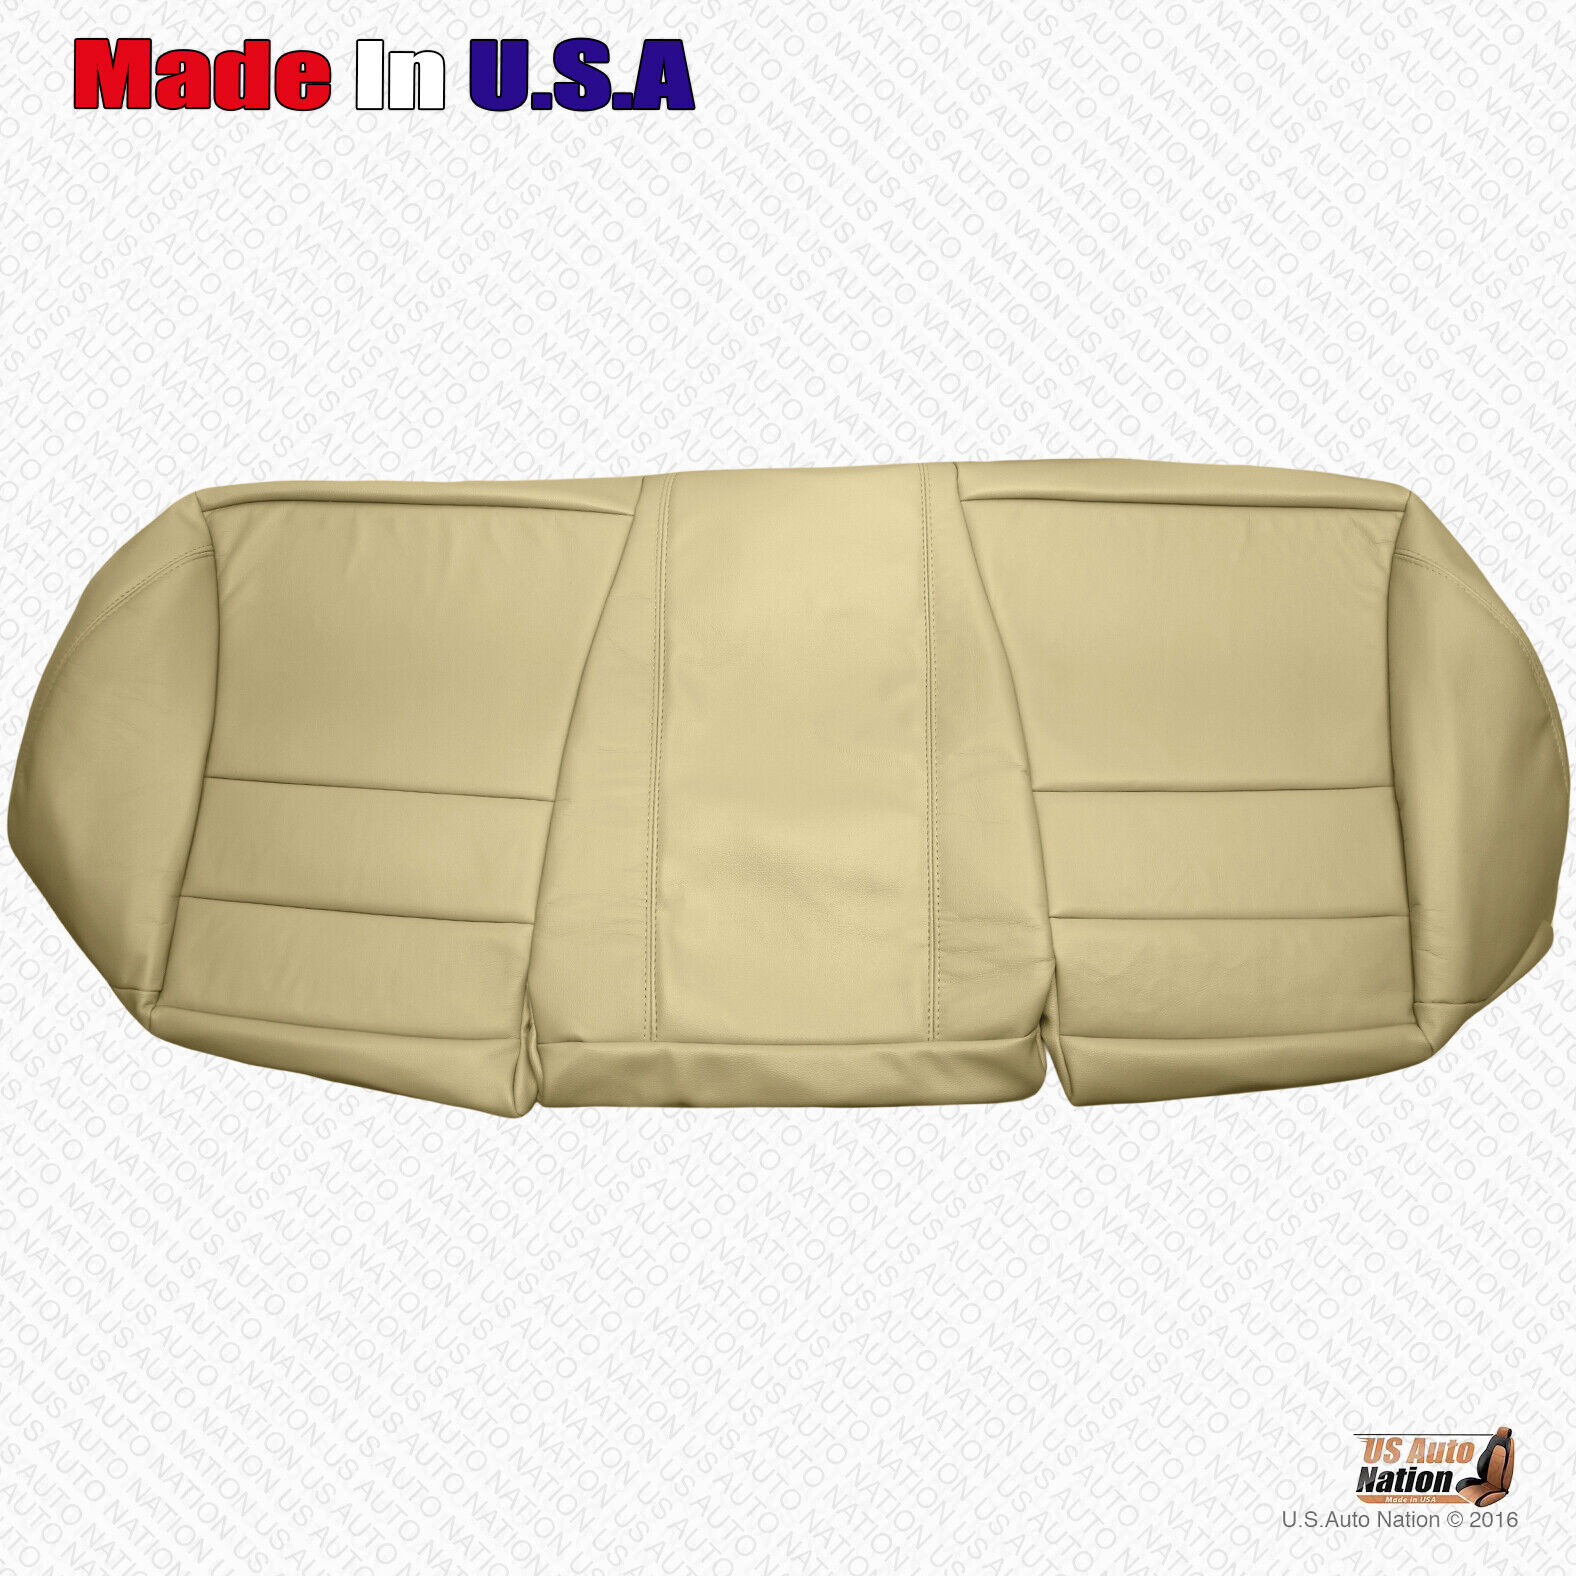 2008 TO 2012 For Honda Accord REAR Bench Bottom Leather Replacement Cover Tan